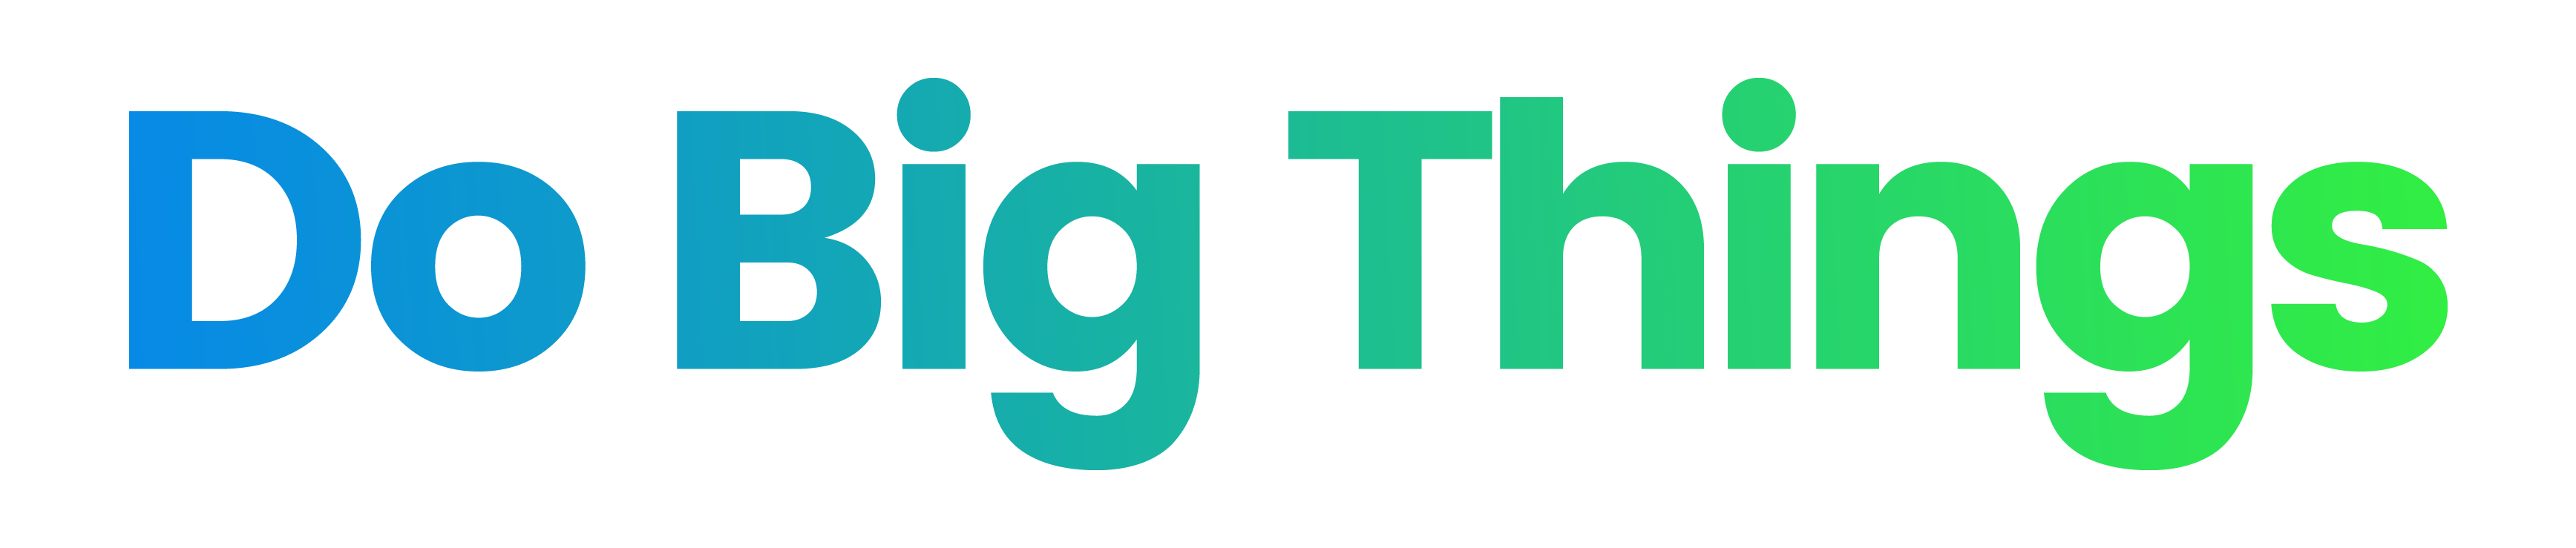 Logo for Do Big Things in blue and green text